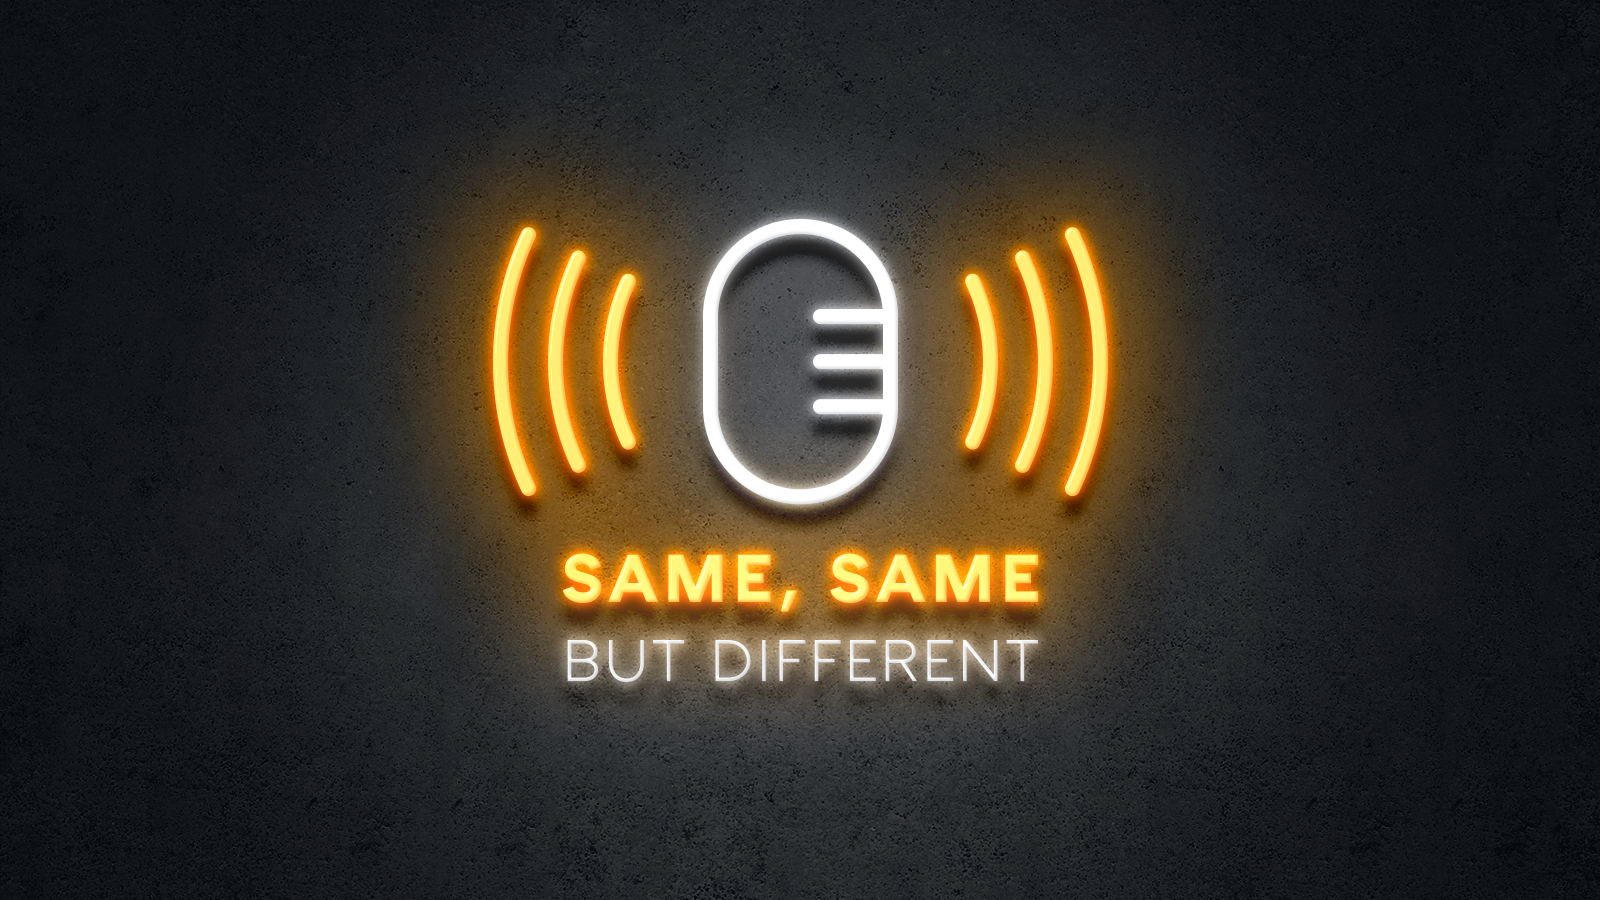 New YC audio series: Same, Same but Different